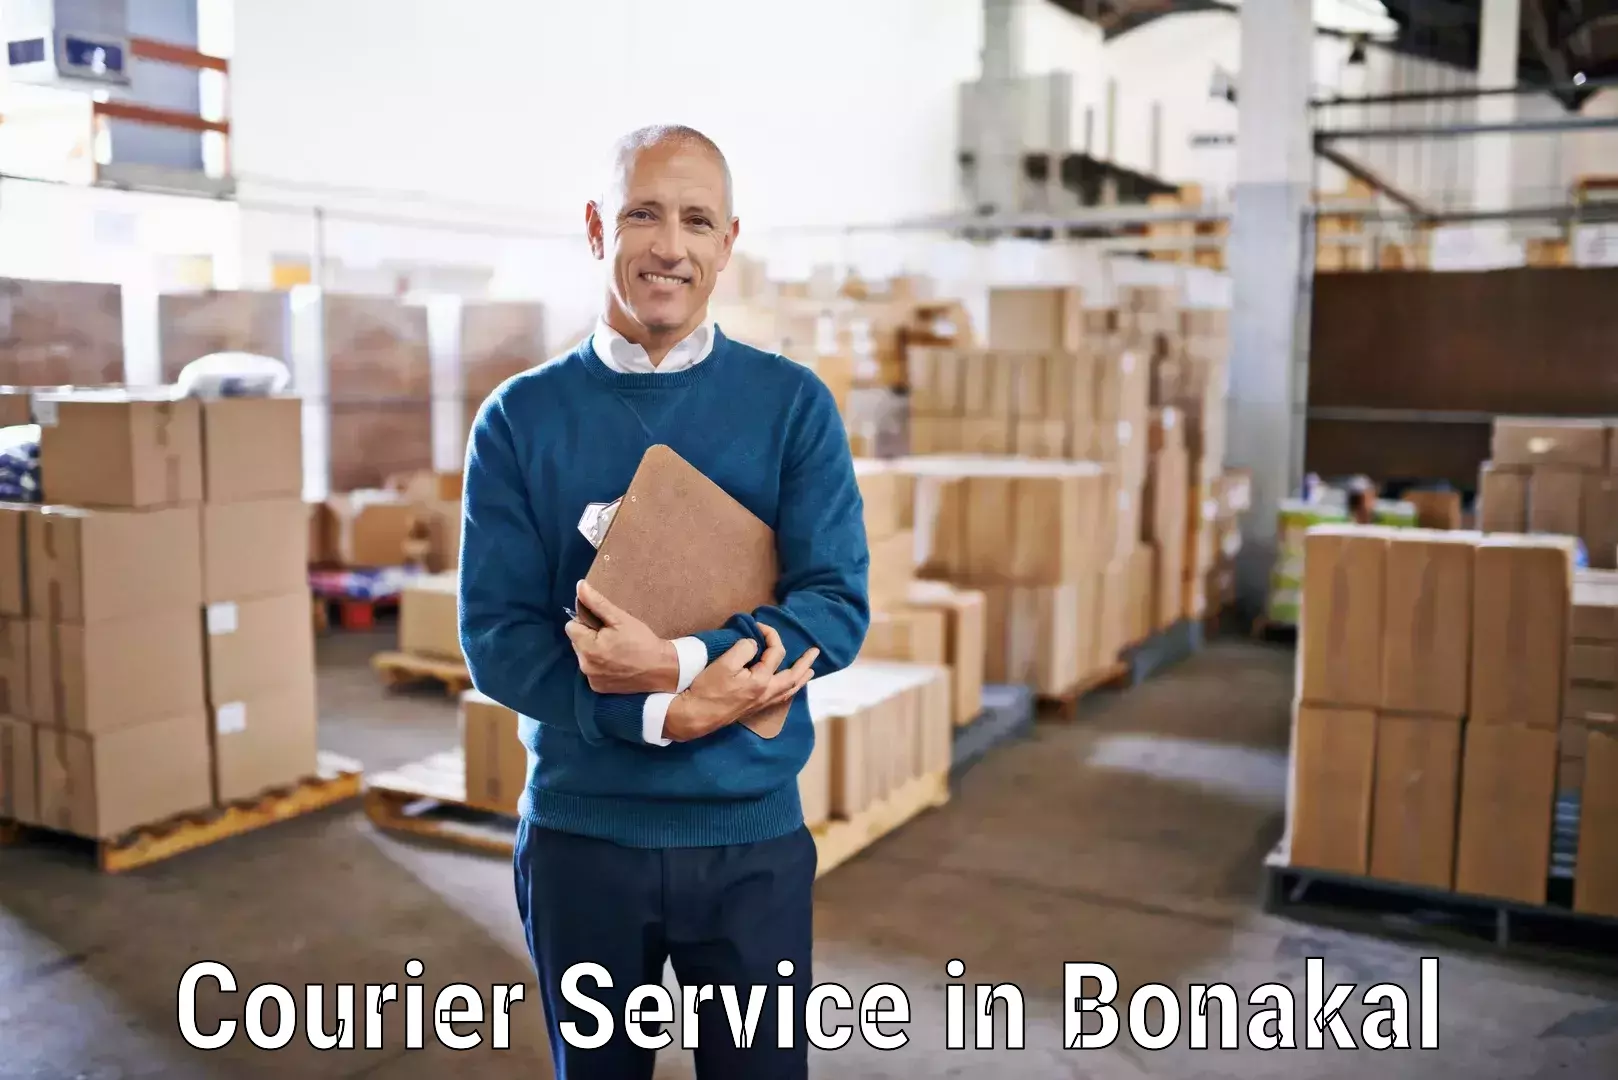 Automated shipping processes in Bonakal